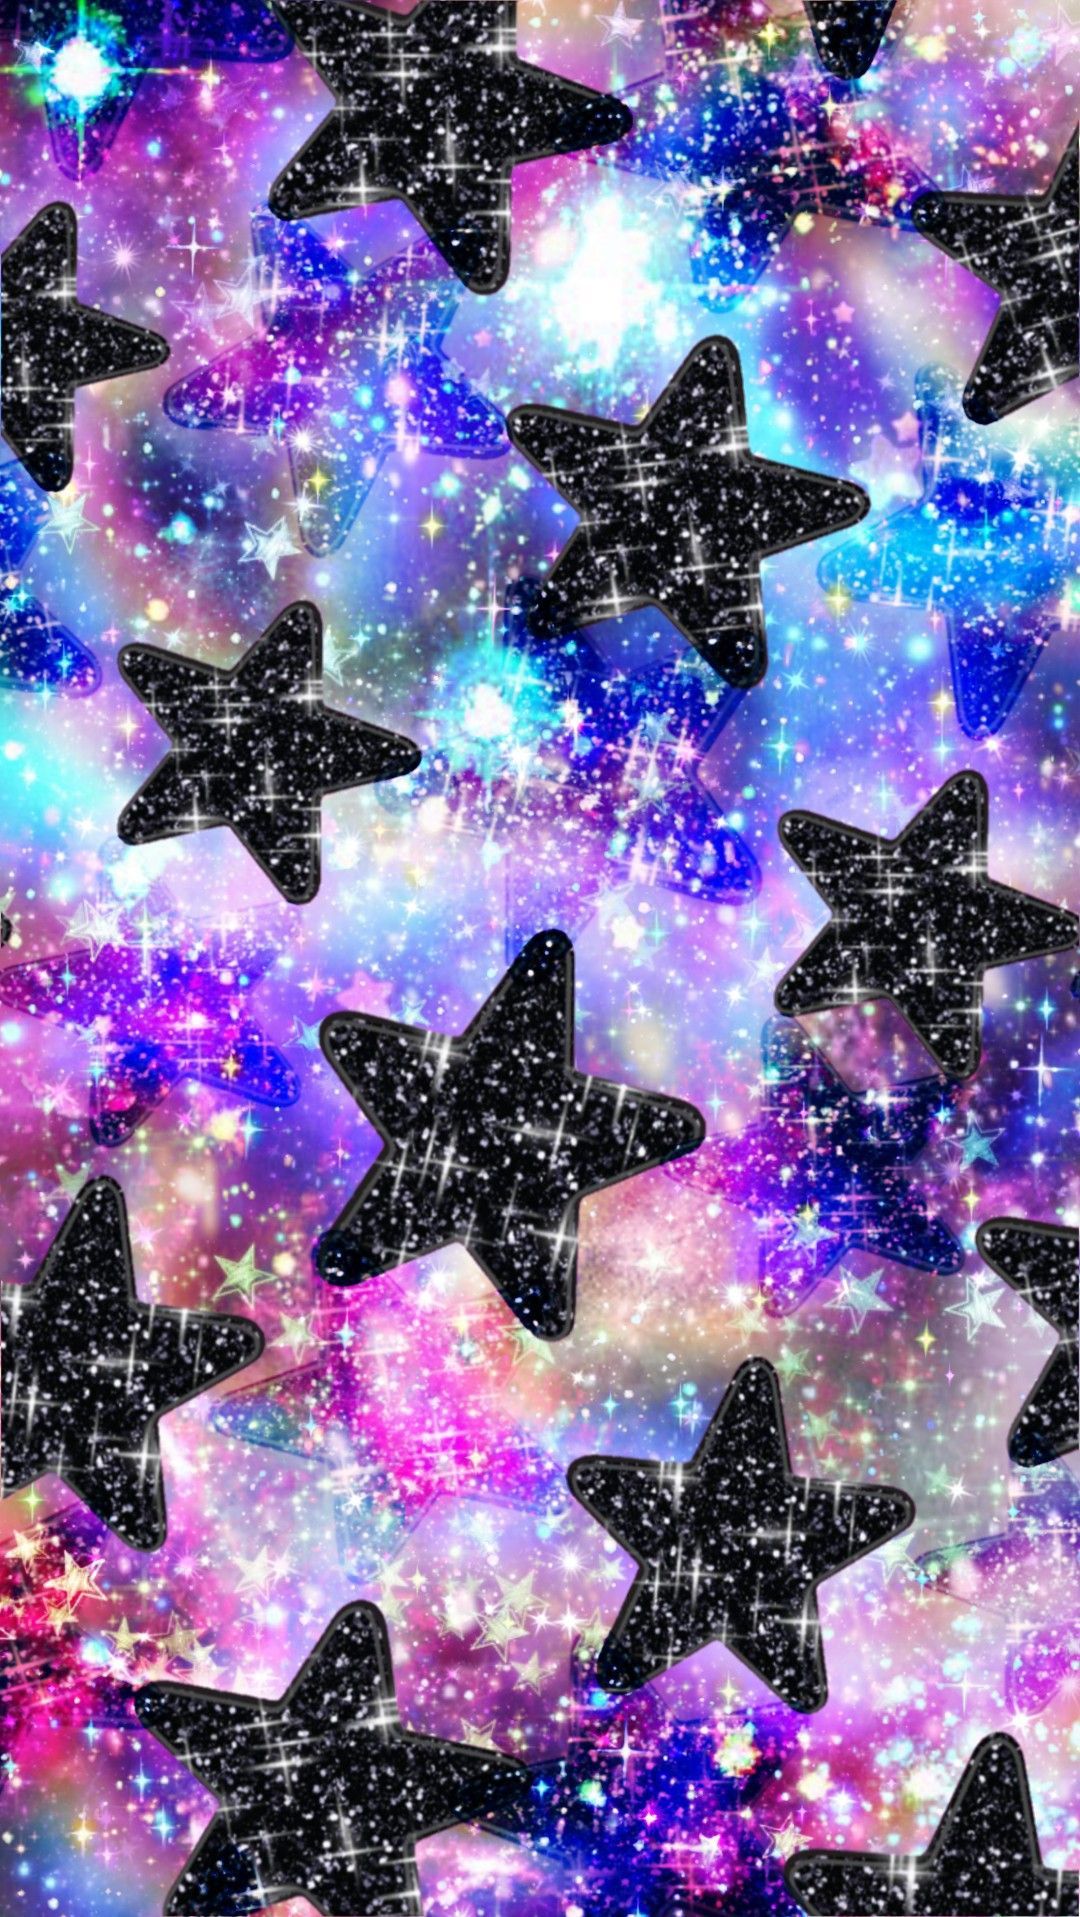 Sparkly Stars, made by me #purple #sparkly #wallpaper #background #sparkles #glittery #galaxy. Background girly, Abstract art wallpaper, Wallpaper background